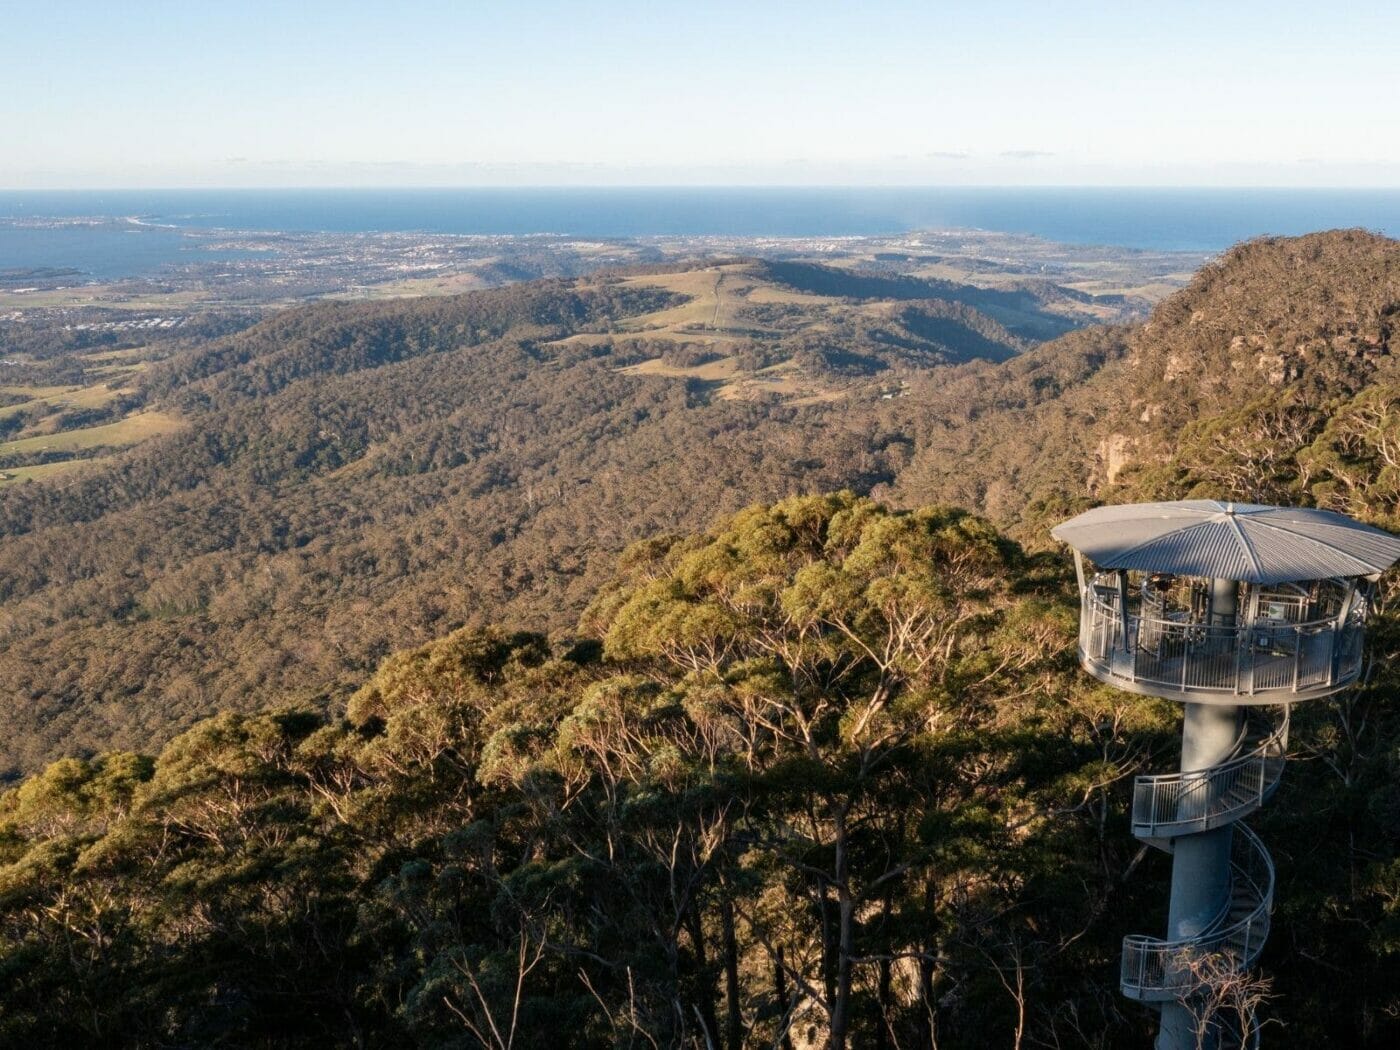 Illawarra Fly Treetop Adventures, things to do in wollongong